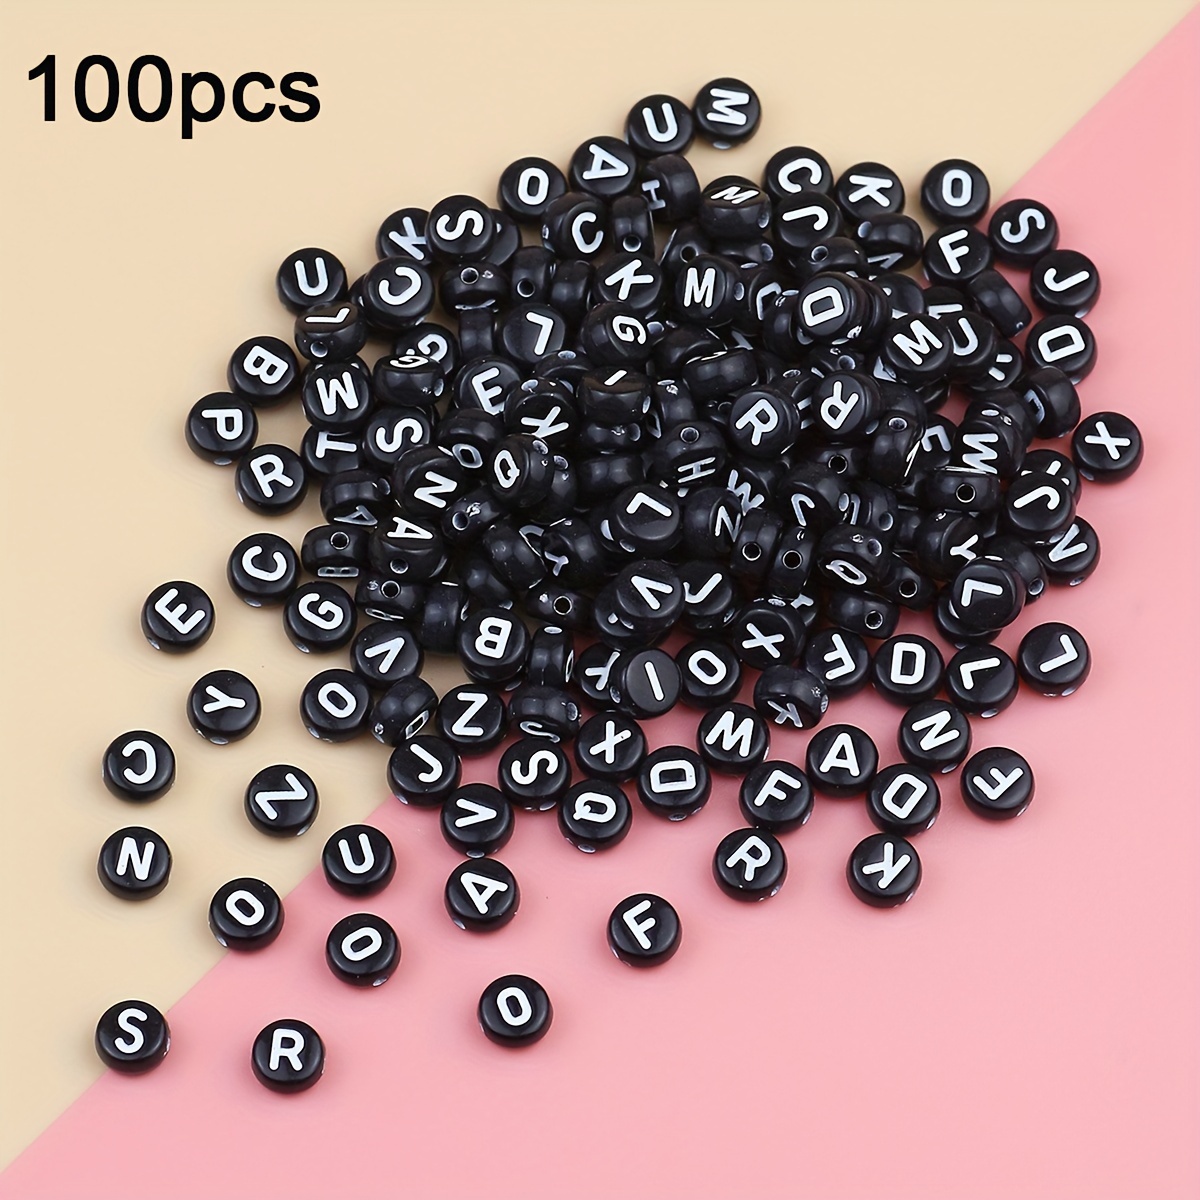 4x7mm Acrylic Round Number Beads Flat Letter Spacer Bead Jewelry Making  Accessor